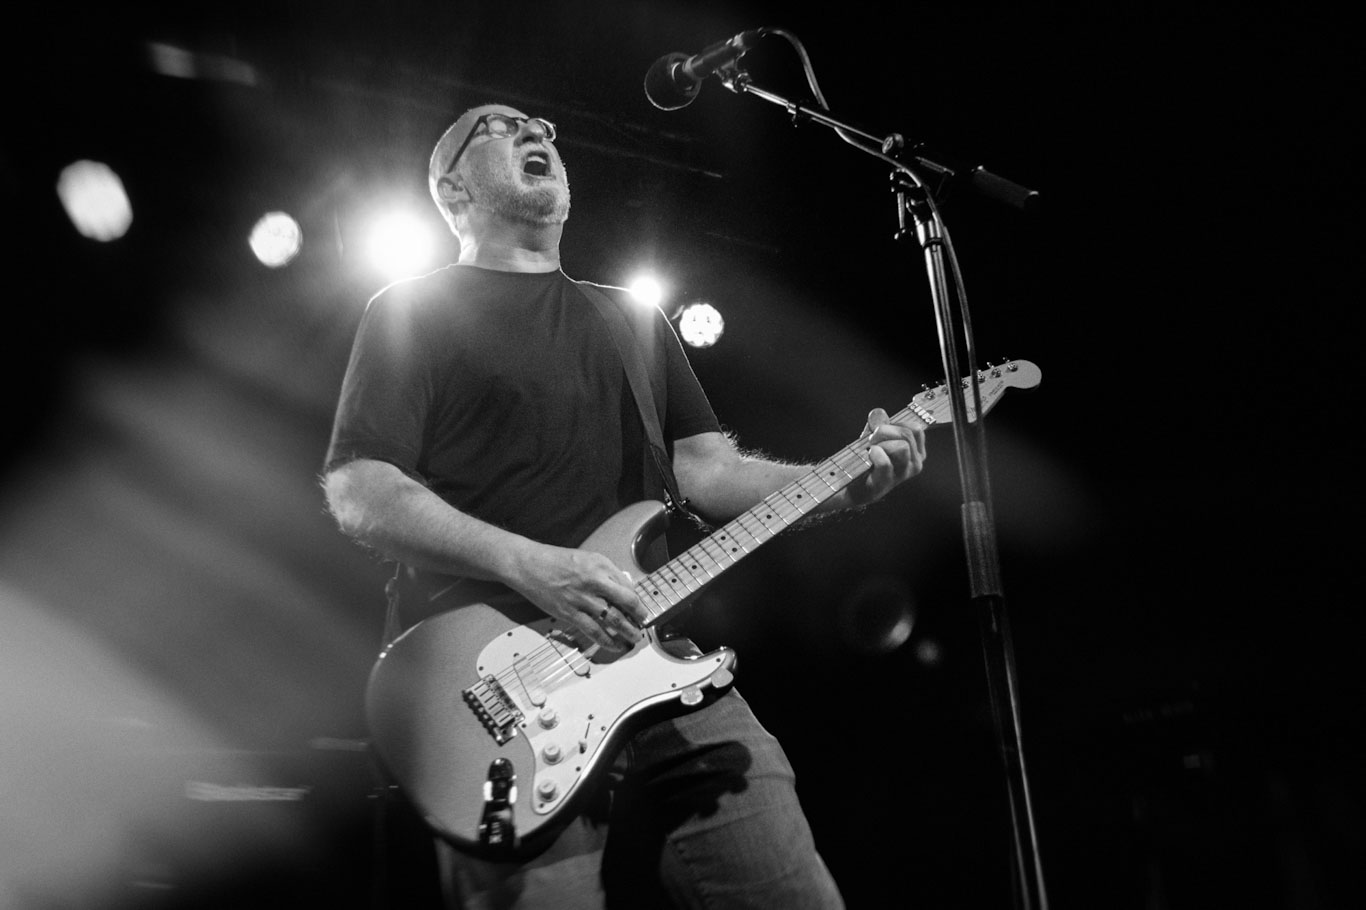 LIVE REVIEW: Bob Mould at The Garage, London Credit: Denise Esposito